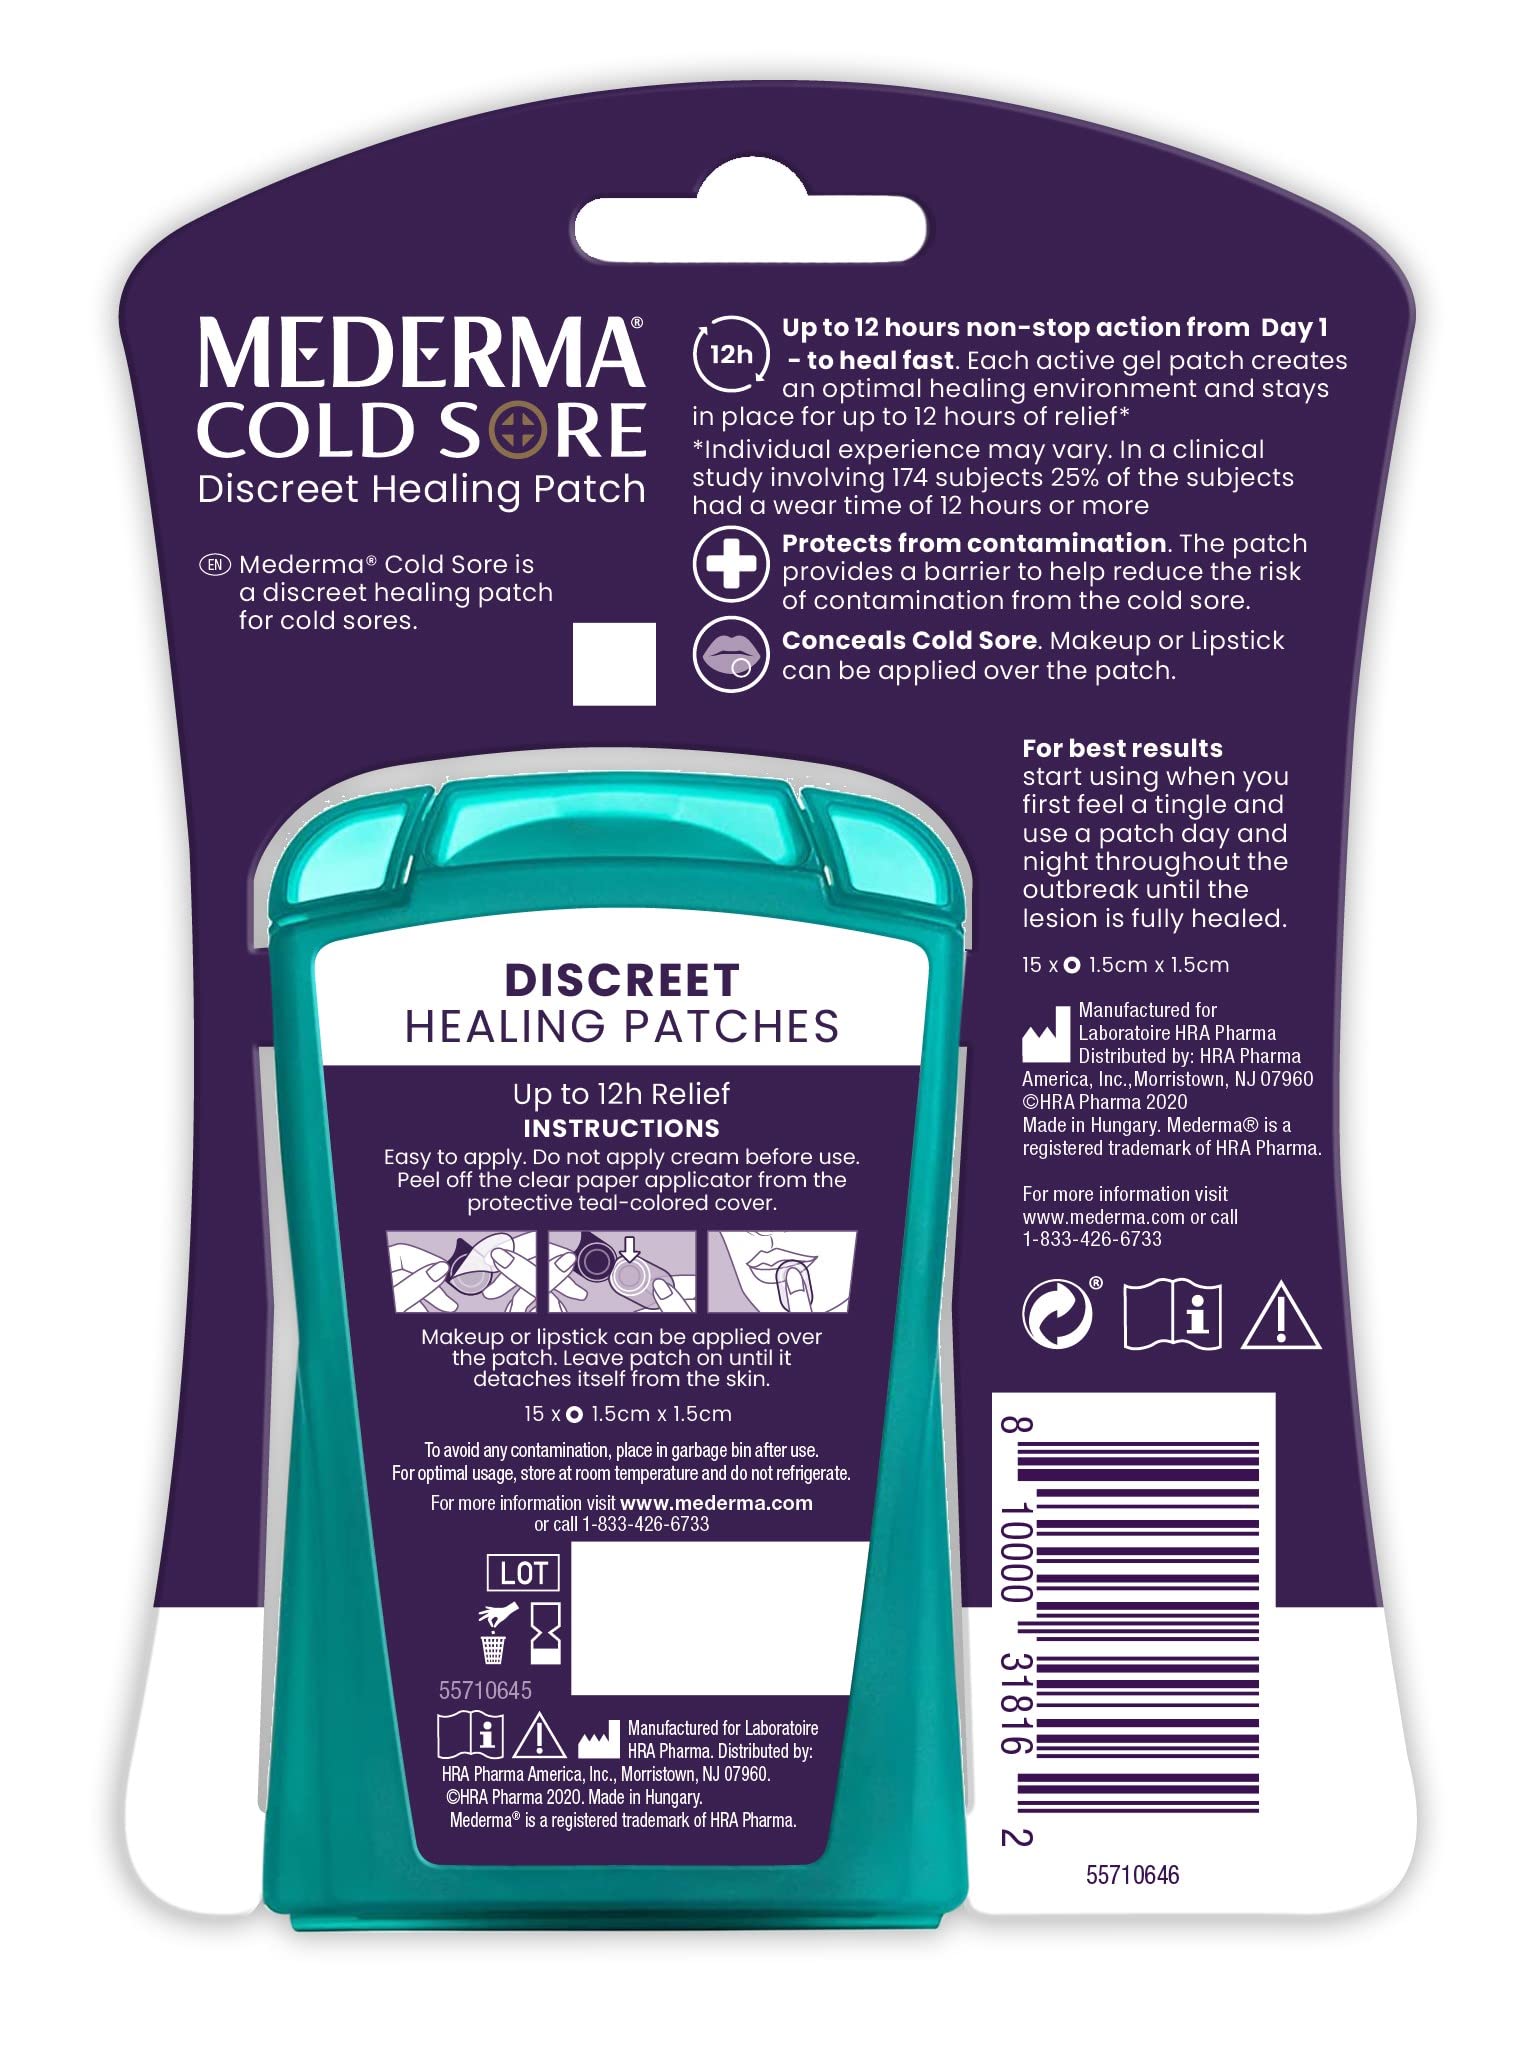 Mederma Cold Sore Fever Blister Discreet Healing Patch - A Patch That Protects and Conceals Cold Sores - 15 Count